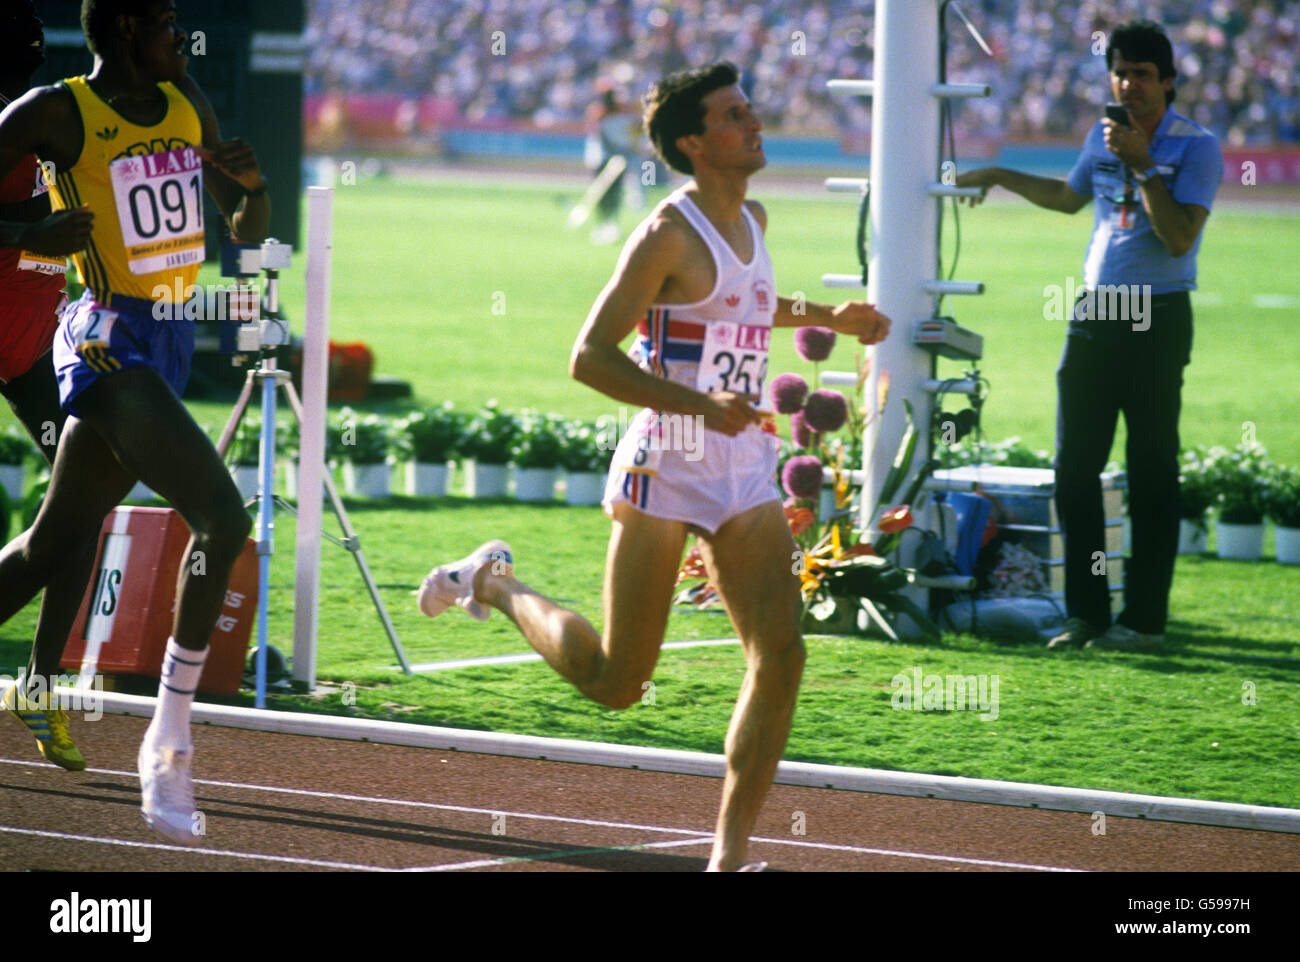 Great Britain's Sebastian Coe coming in third in Heat 2 of the Men's 800 metres, behind Brazil's Jose Luiz Barbosa (no.91). Both qualified for the semi-finals. Stock Photo